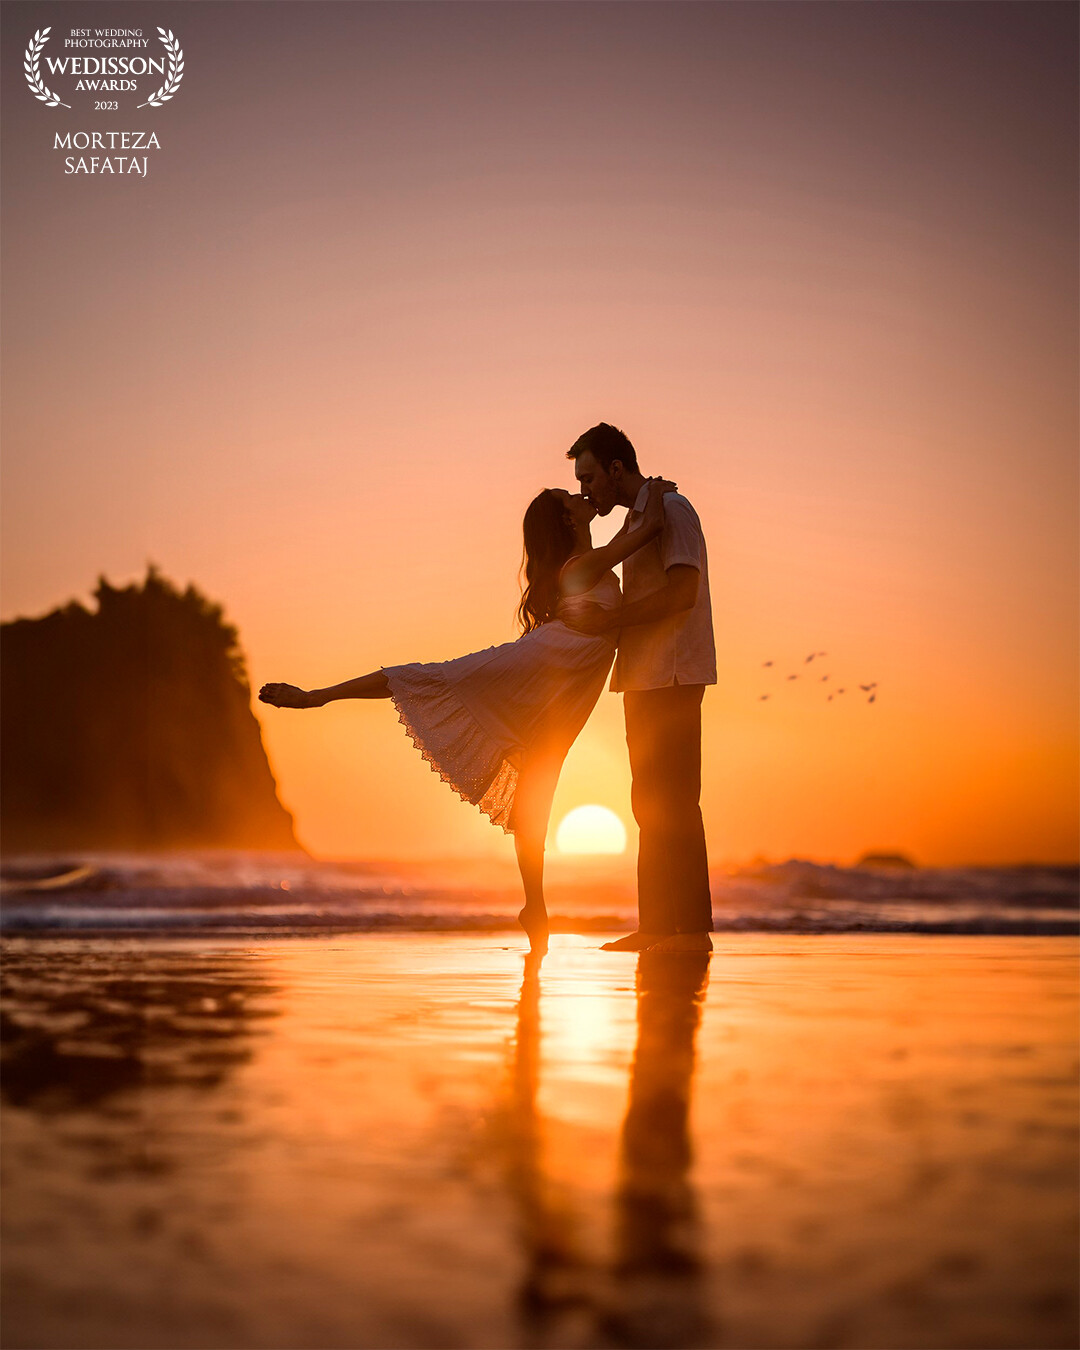 Amid the breathtaking Pacific Northwest coastline, we found ourselves immersed in a magical engagement photoshoot. As the sun began its slow descent, casting a warm golden glow on everything in its path, I couldn't help but feel the palpable love between Asia and David. With the gentle rhythm of the waves as our backdrop, I framed them in an embrace, their silhouettes softly illuminated by the radiant sunset.<br />
<br />
As Asia and David held each other close, lost in their own world, I clicked away, capturing a fleeting yet eternal moment.<br />
<br />
This photo embodies the essence of their journey – a love that shines even in the midst of life's changing tides. With every click of the shutter, I knew we were creating memories that would forever narrate their beautiful love story.